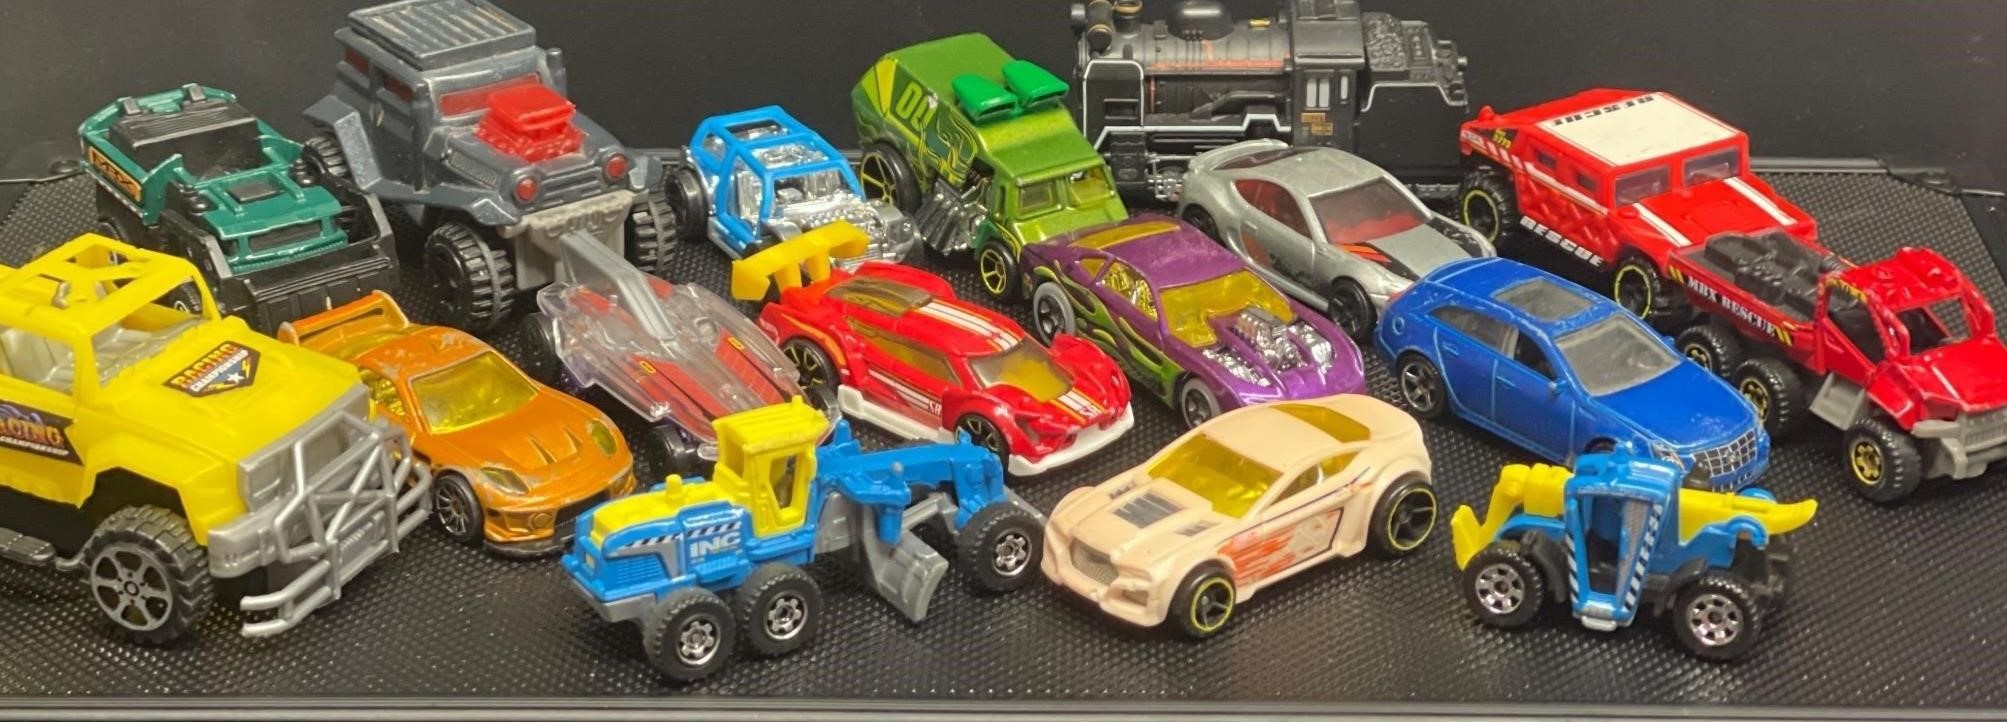 HOT WHEELS DIE CAST COLLECTIBLE MIX LOT